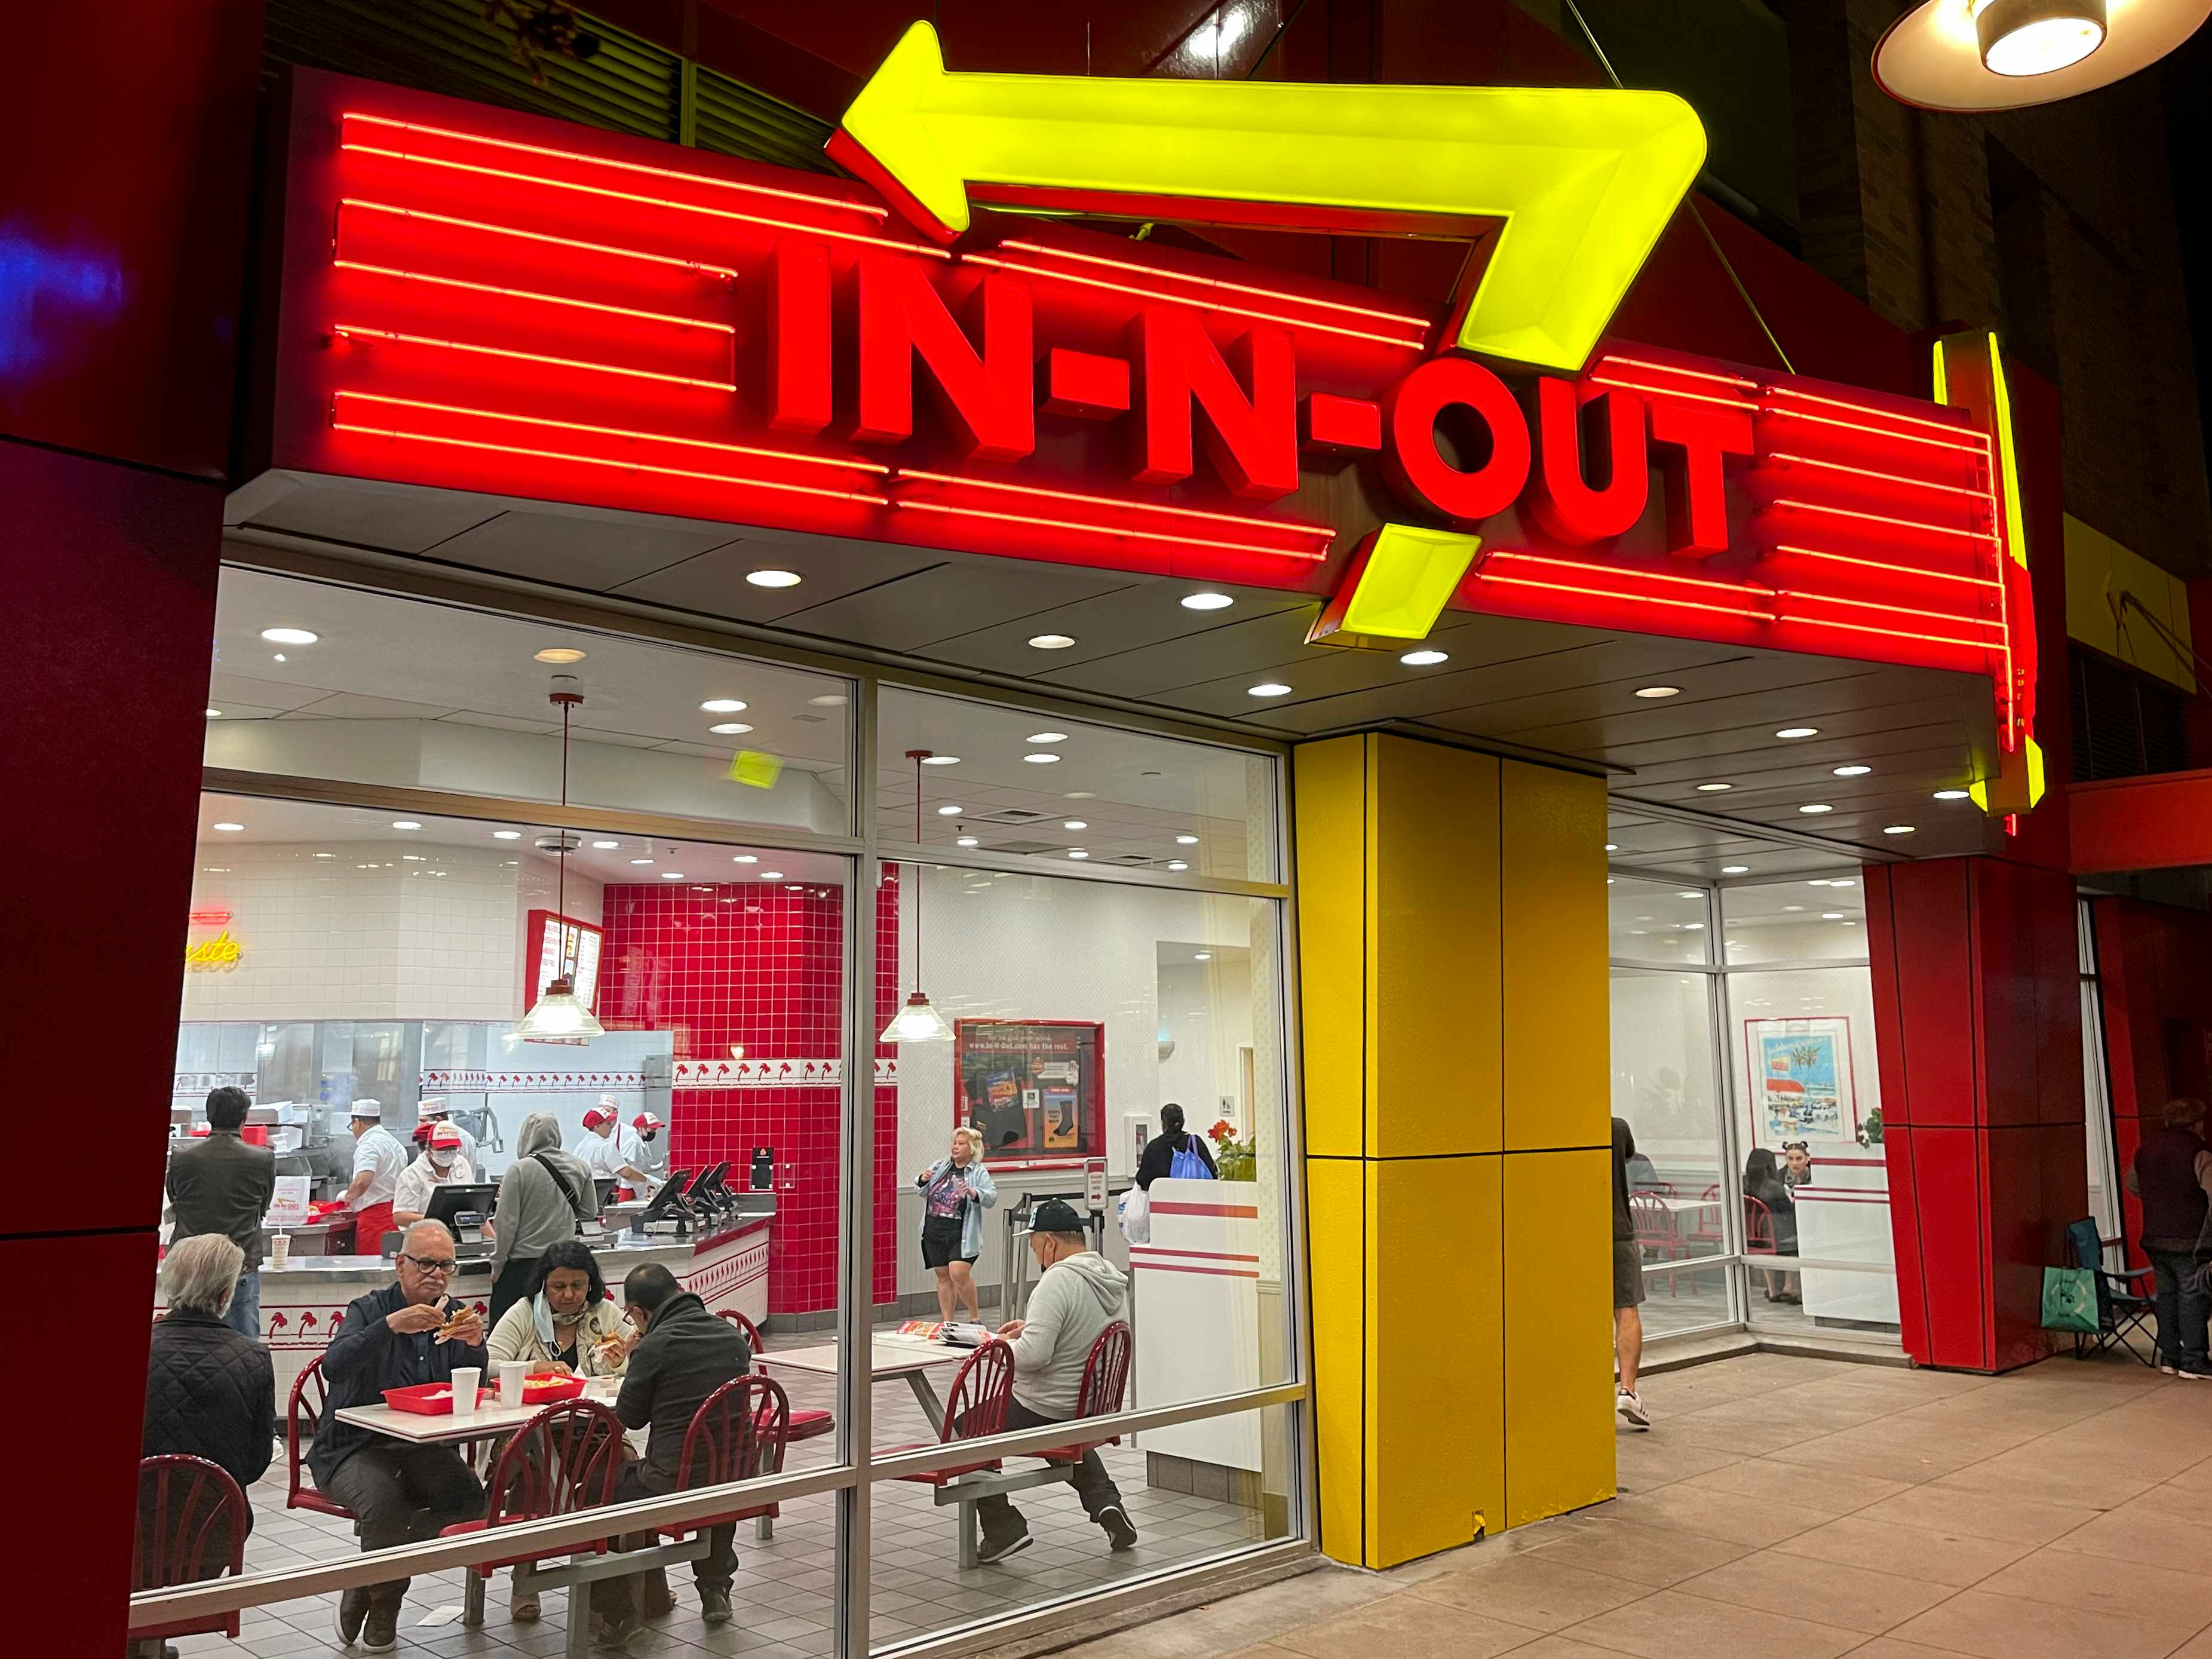 An In-N-Out restaurant storefront at night with the sign lit up.